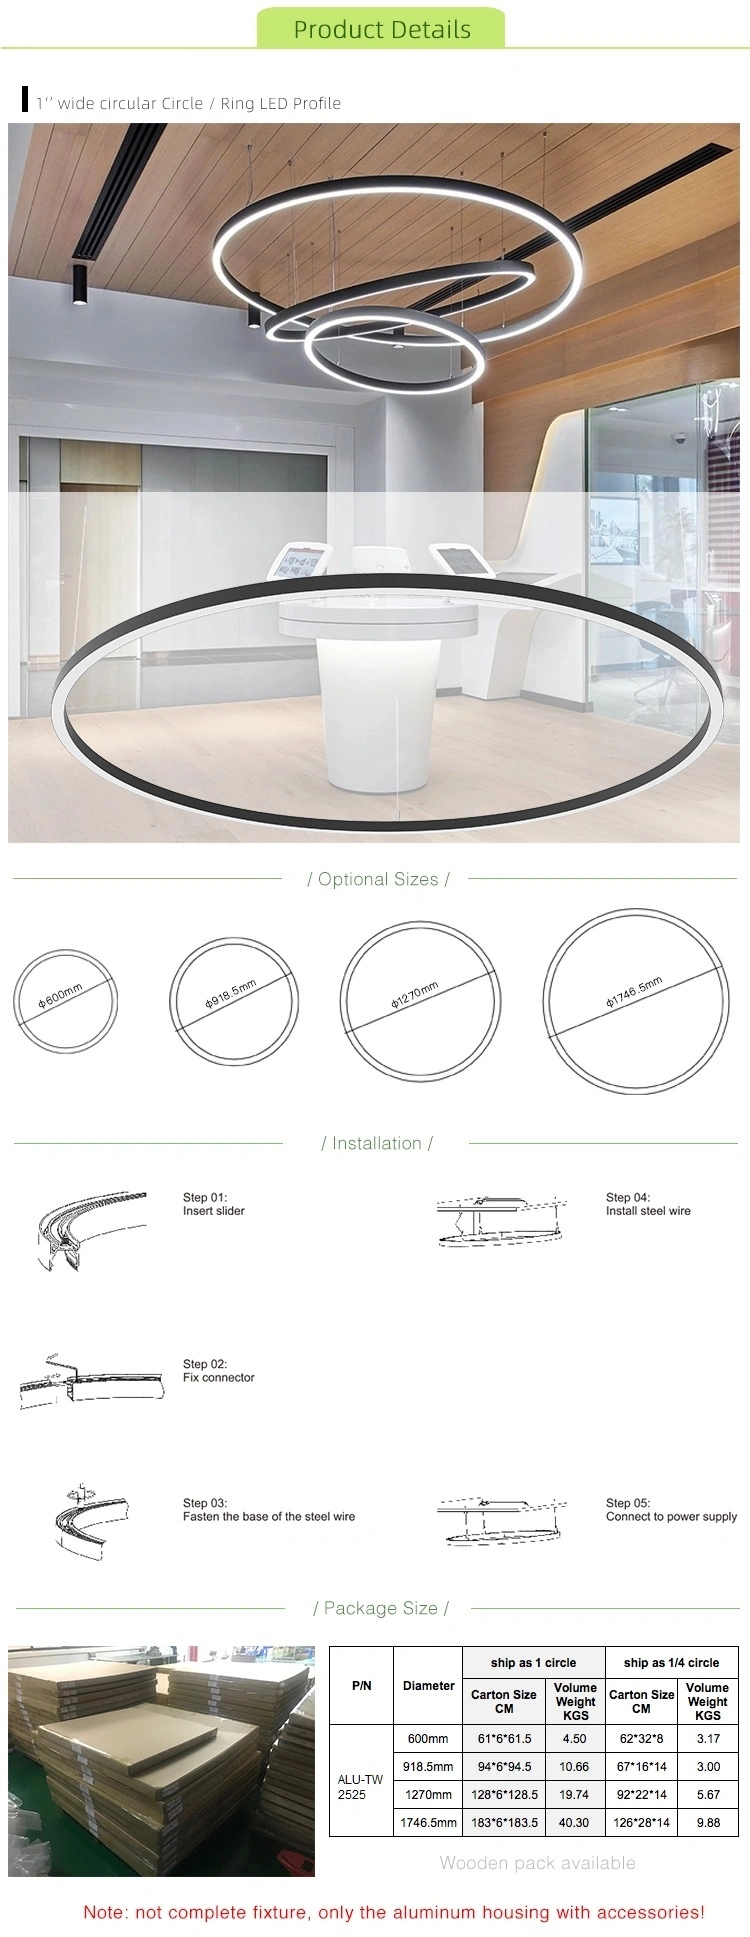 New Fashion Suspended Light Fixtures Circle Ring Profile LED Lighting for Indoor Projects